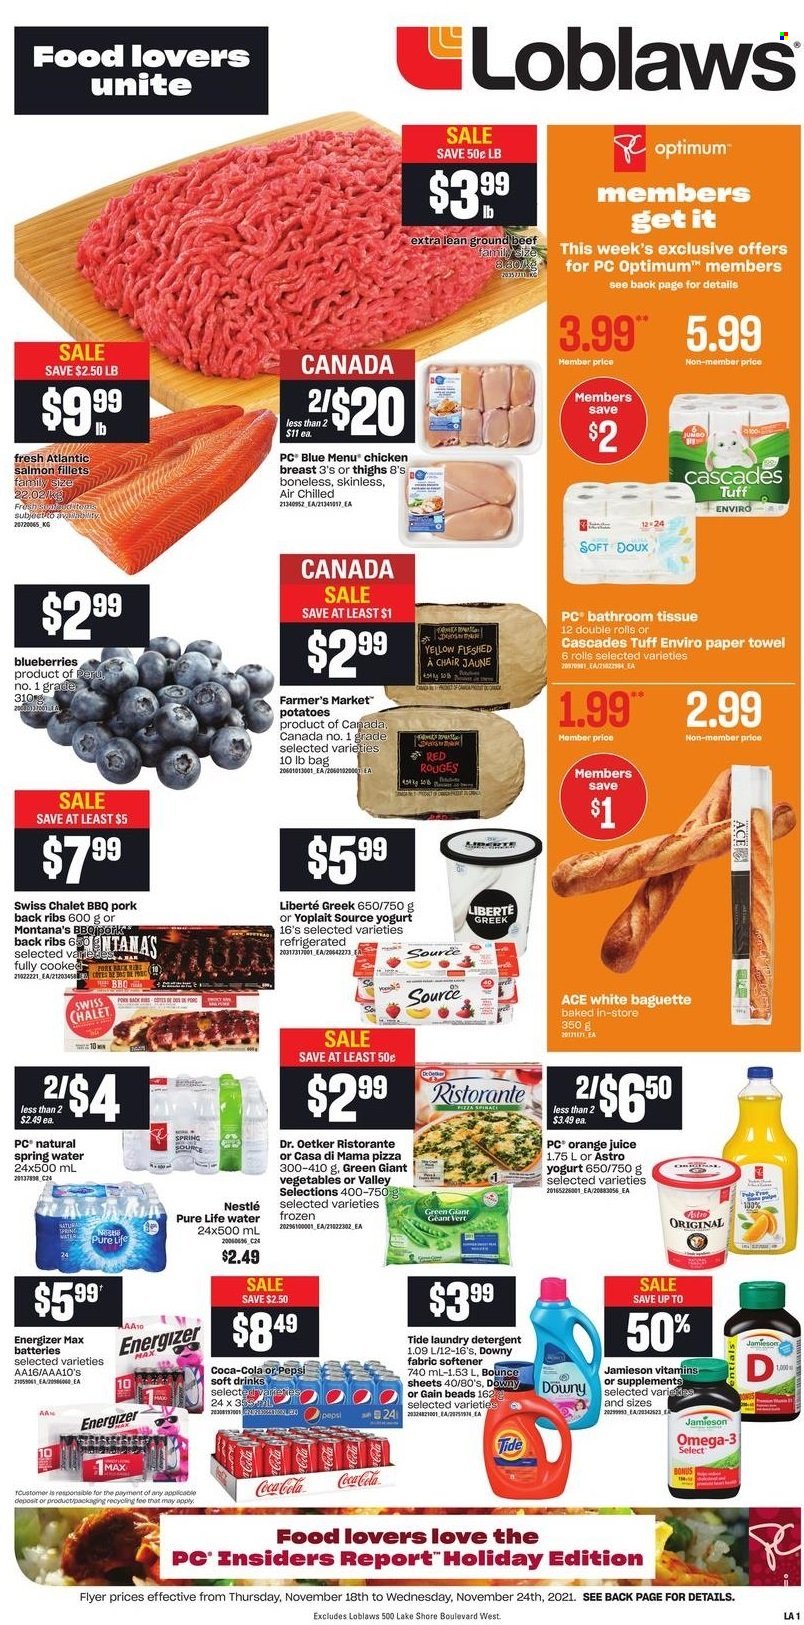 thumbnail - Loblaws Flyer - November 18, 2021 - November 24, 2021 - Sales products - potatoes, blueberries, salmon, salmon fillet, pizza, Dr. Oetker, yoghurt, Yoplait, Coca-Cola, Pepsi, orange juice, juice, soft drink, spring water, Pure Life Water, chicken breasts, chicken, beef meat, ground beef, pork meat, pork ribs, pork back ribs, bath tissue, paper towels, Gain, Tide, fabric softener, laundry detergent, Bounce, Downy Laundry, Optimum, Omega-3, Nestlé, baguette, detergent, Energizer. Page 1.